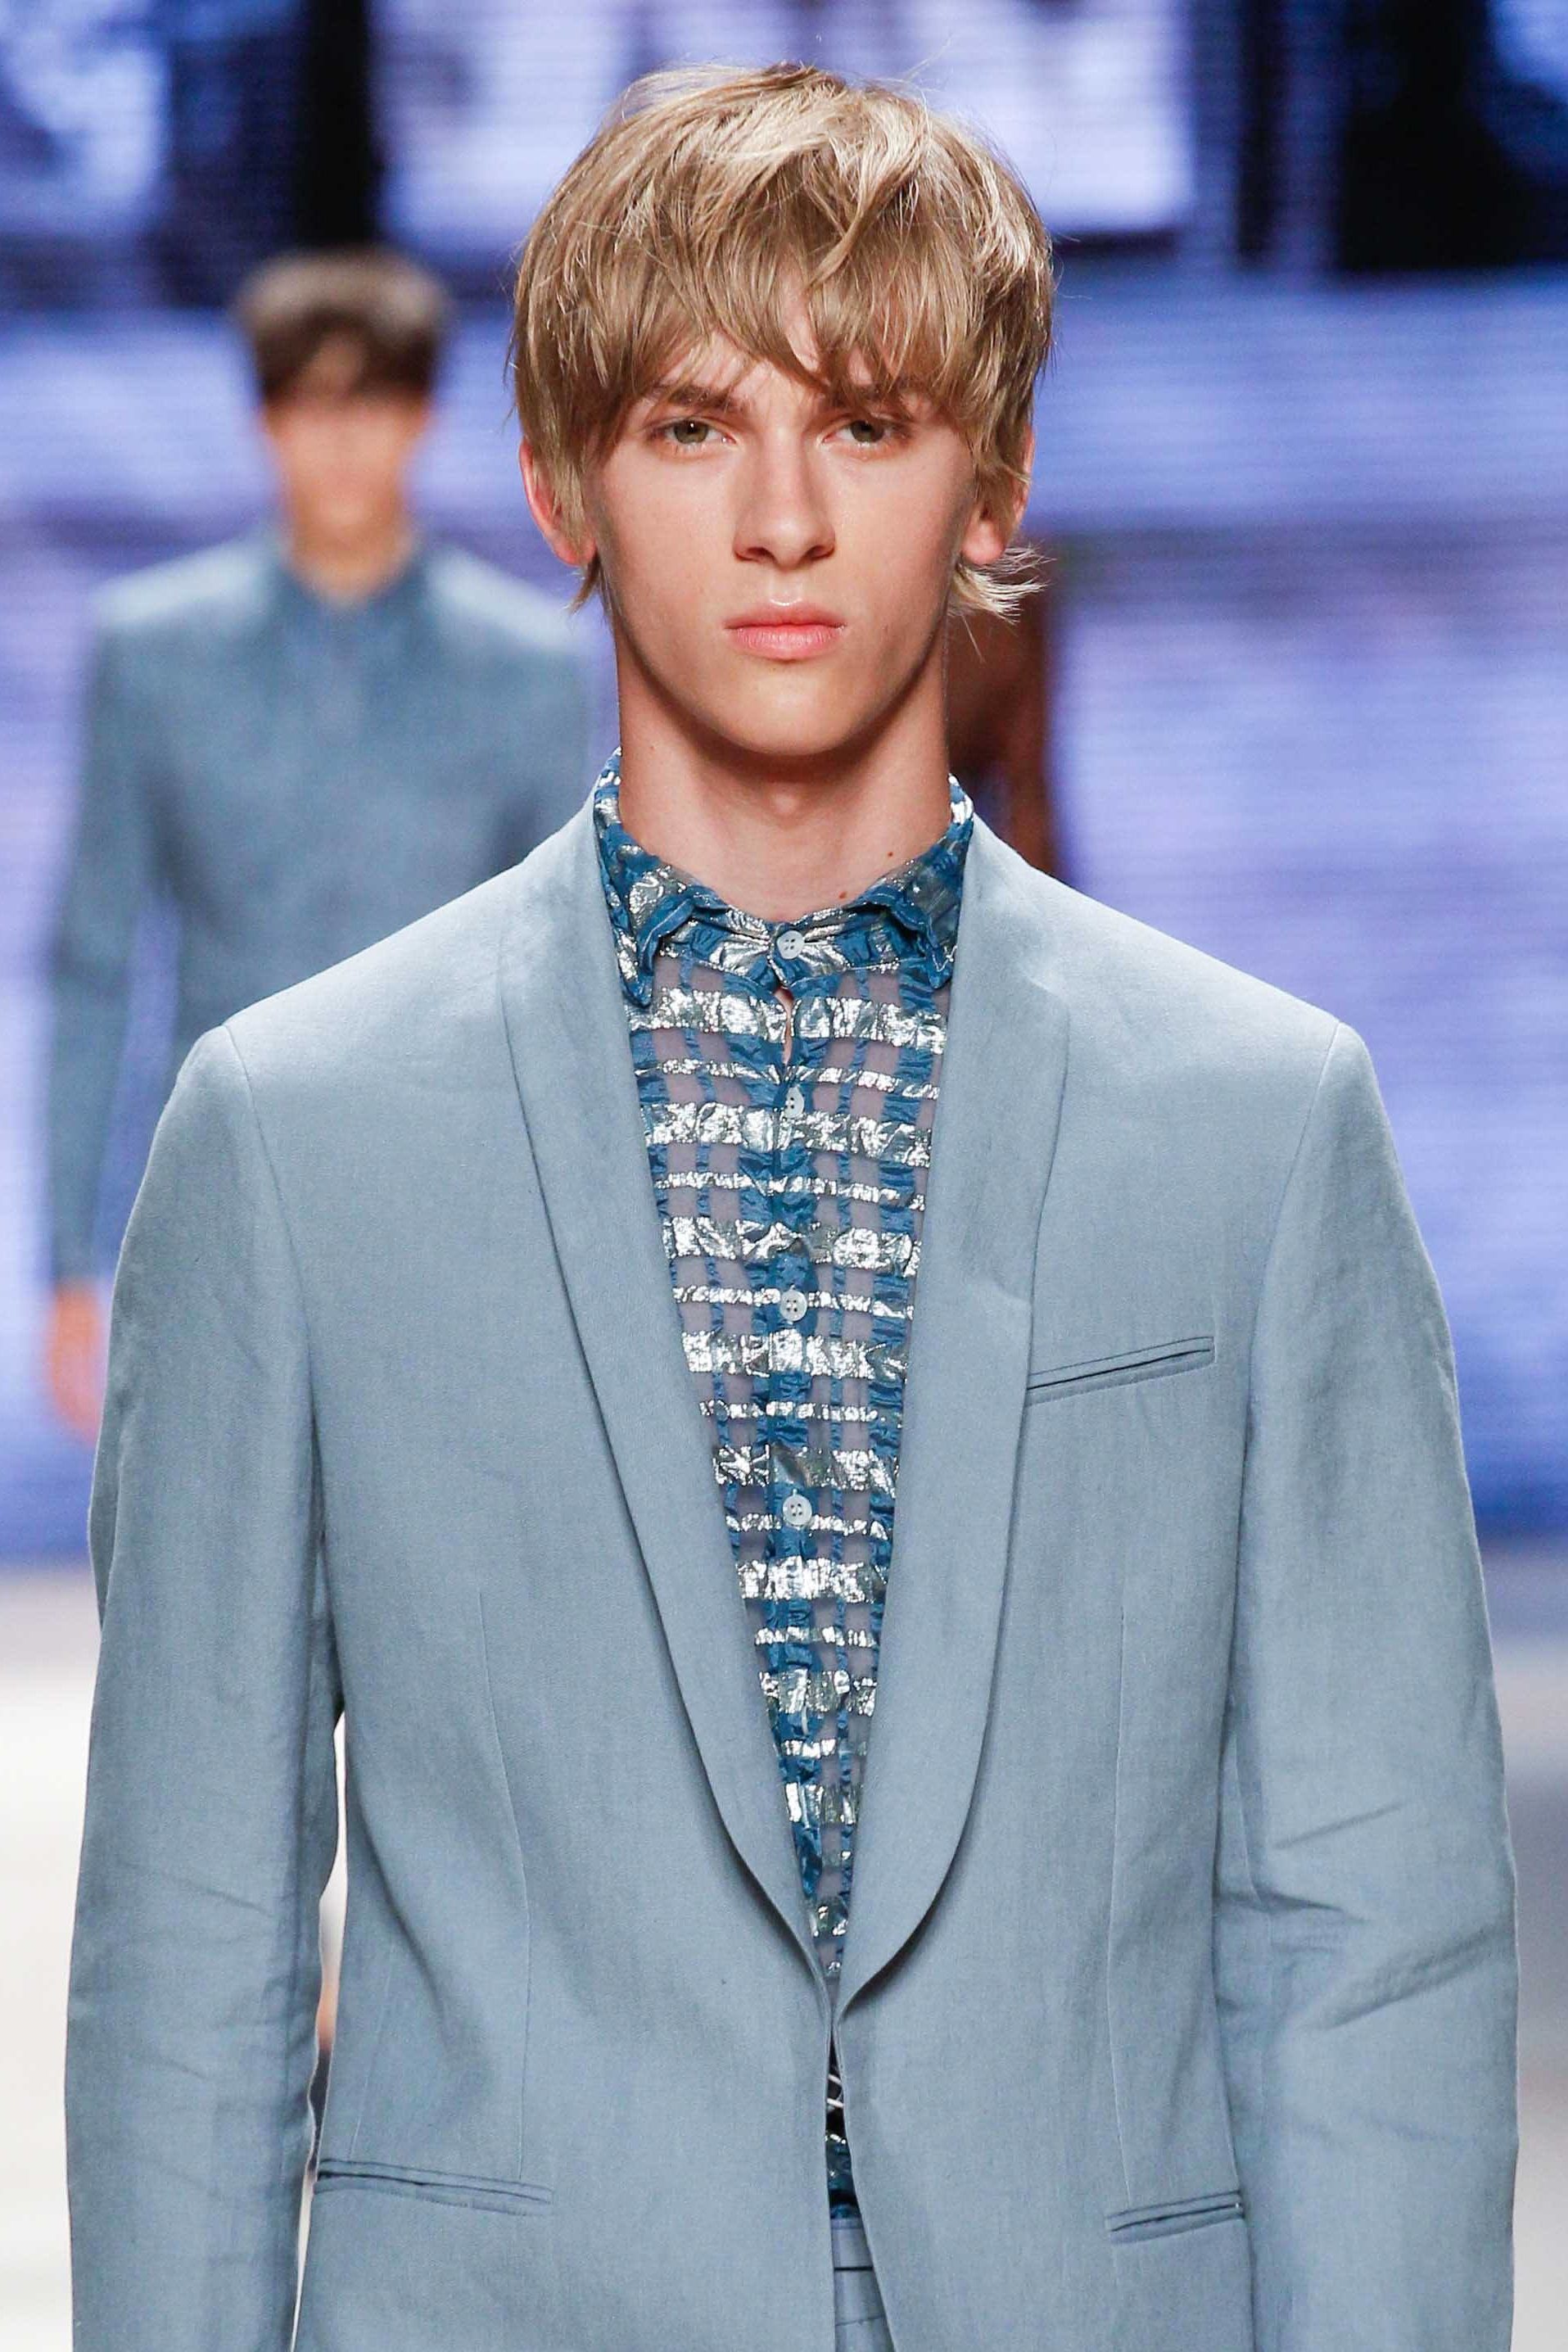 Fall hairstyle update for the guys: 5 Fringes to try this autumn